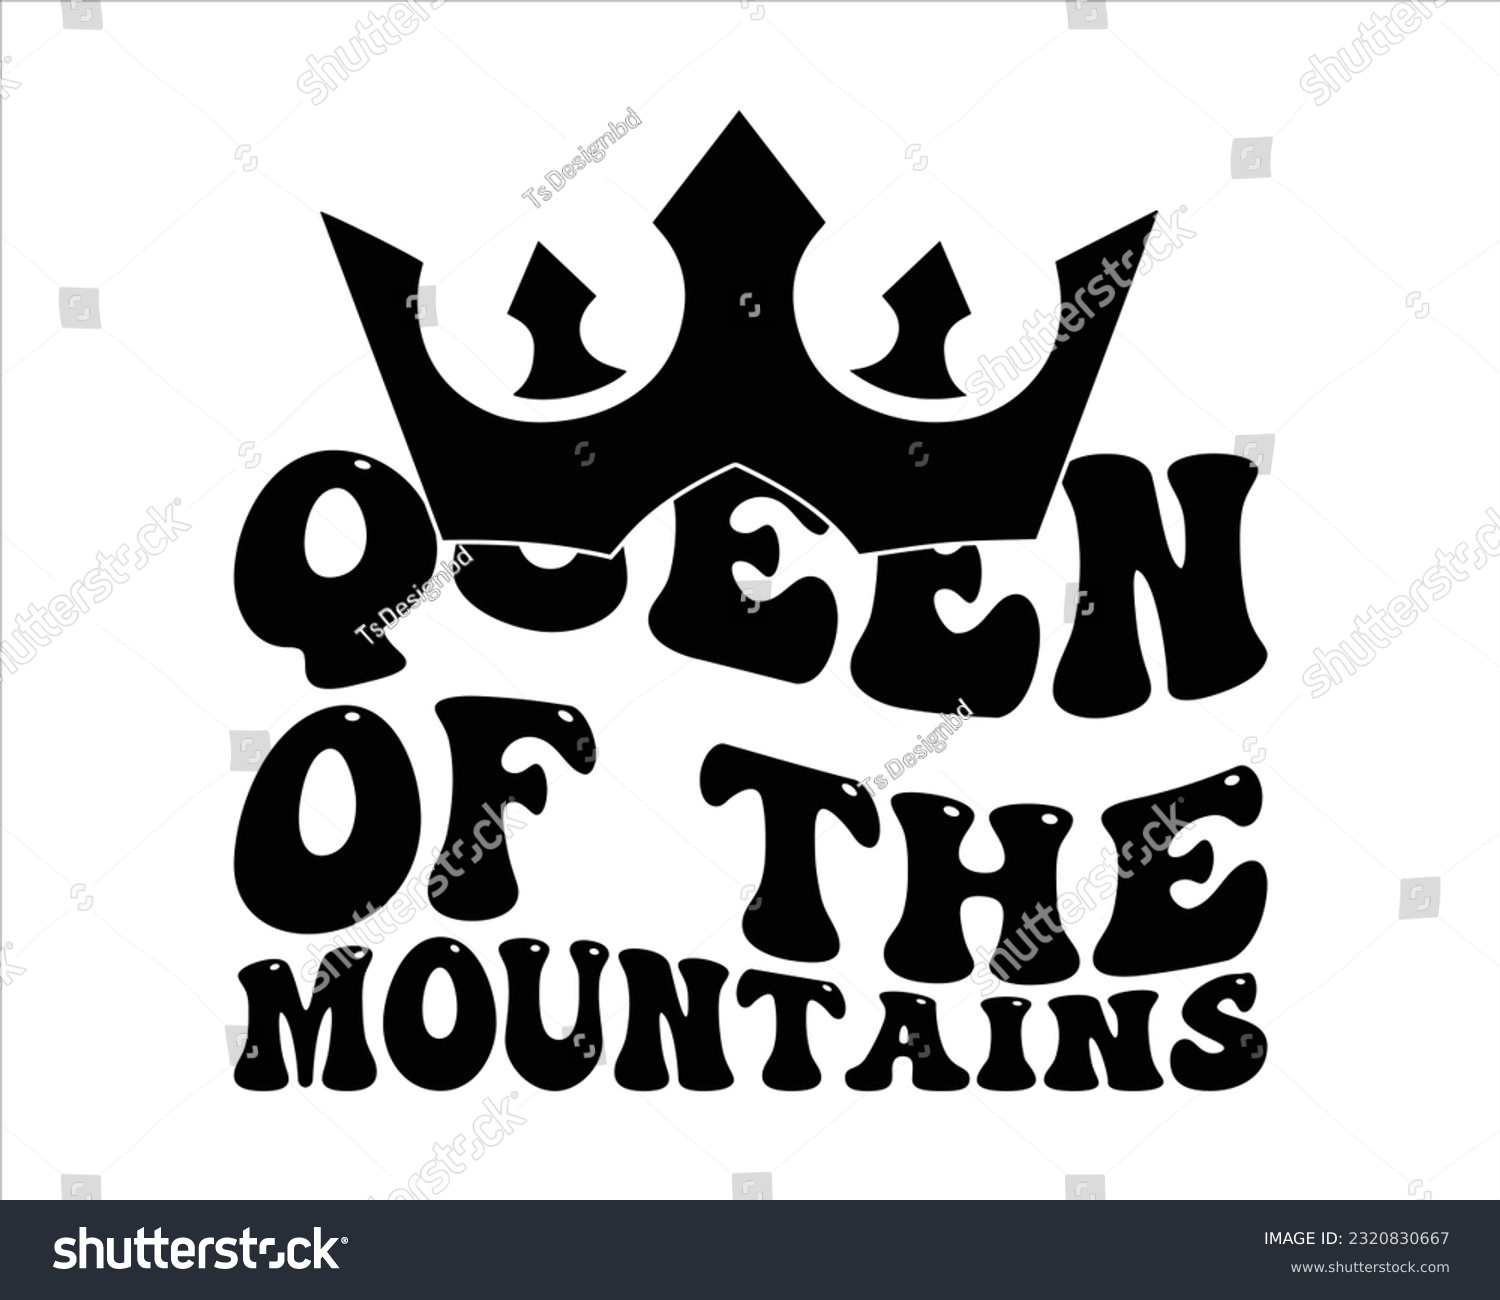 SVG of Queen Of The Mountains Retro Svg Design,Hiking Retro Svg Design, Mountain illustration, outdoor adventure ,Outdoor Adventure Inspiring Motivation Quote, camping,groovy design svg